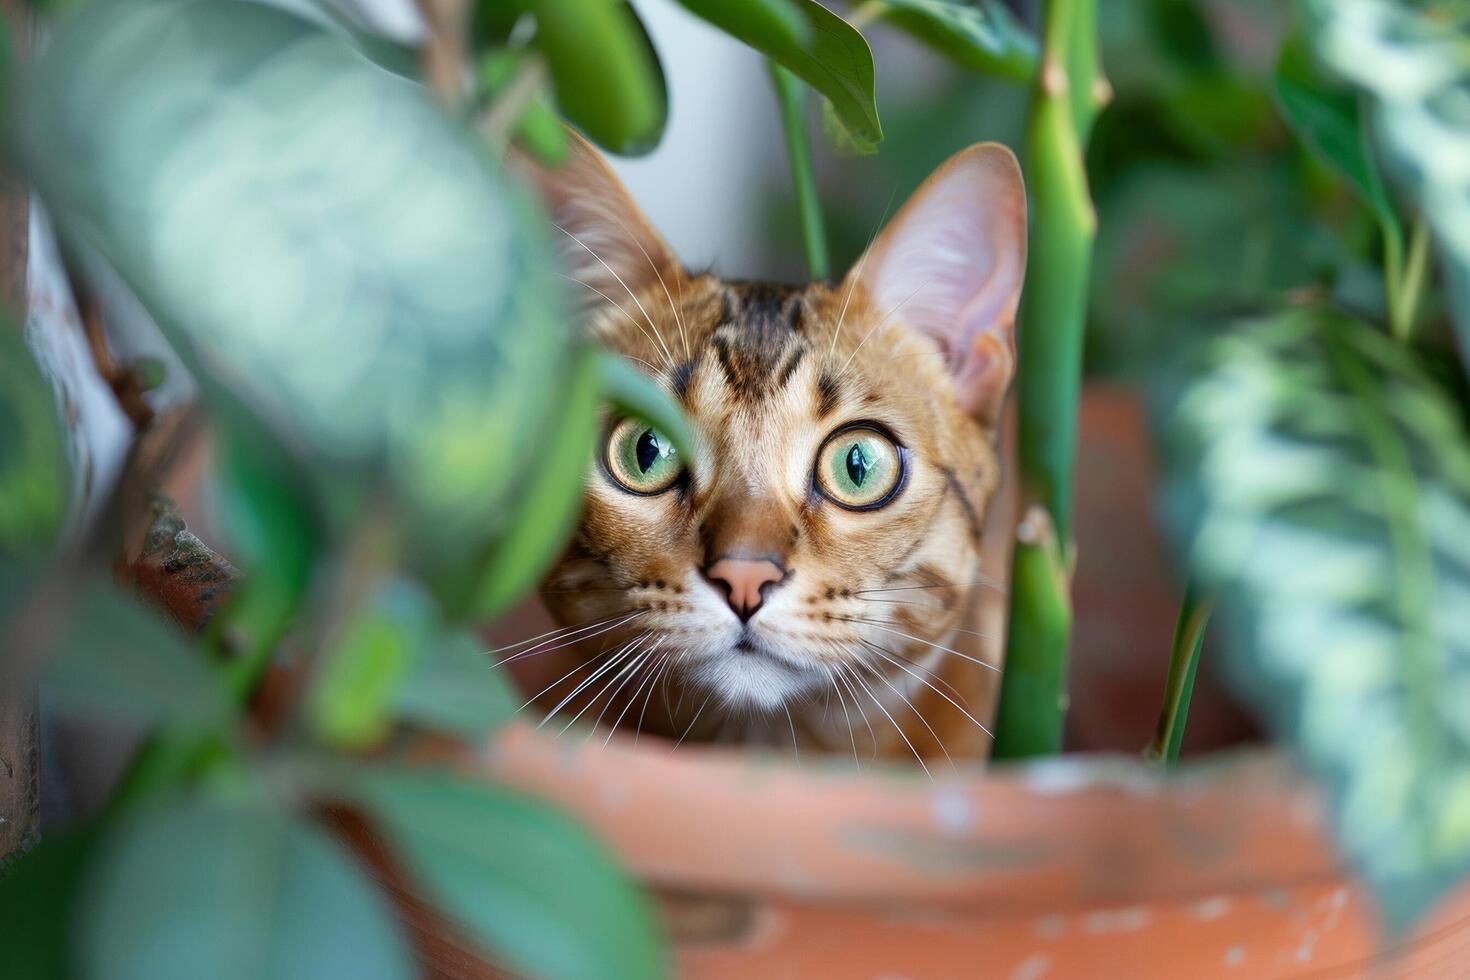 A curious Bengal cat peering out from behind a potted plant, its distinctive coat pattern catching the eye photo